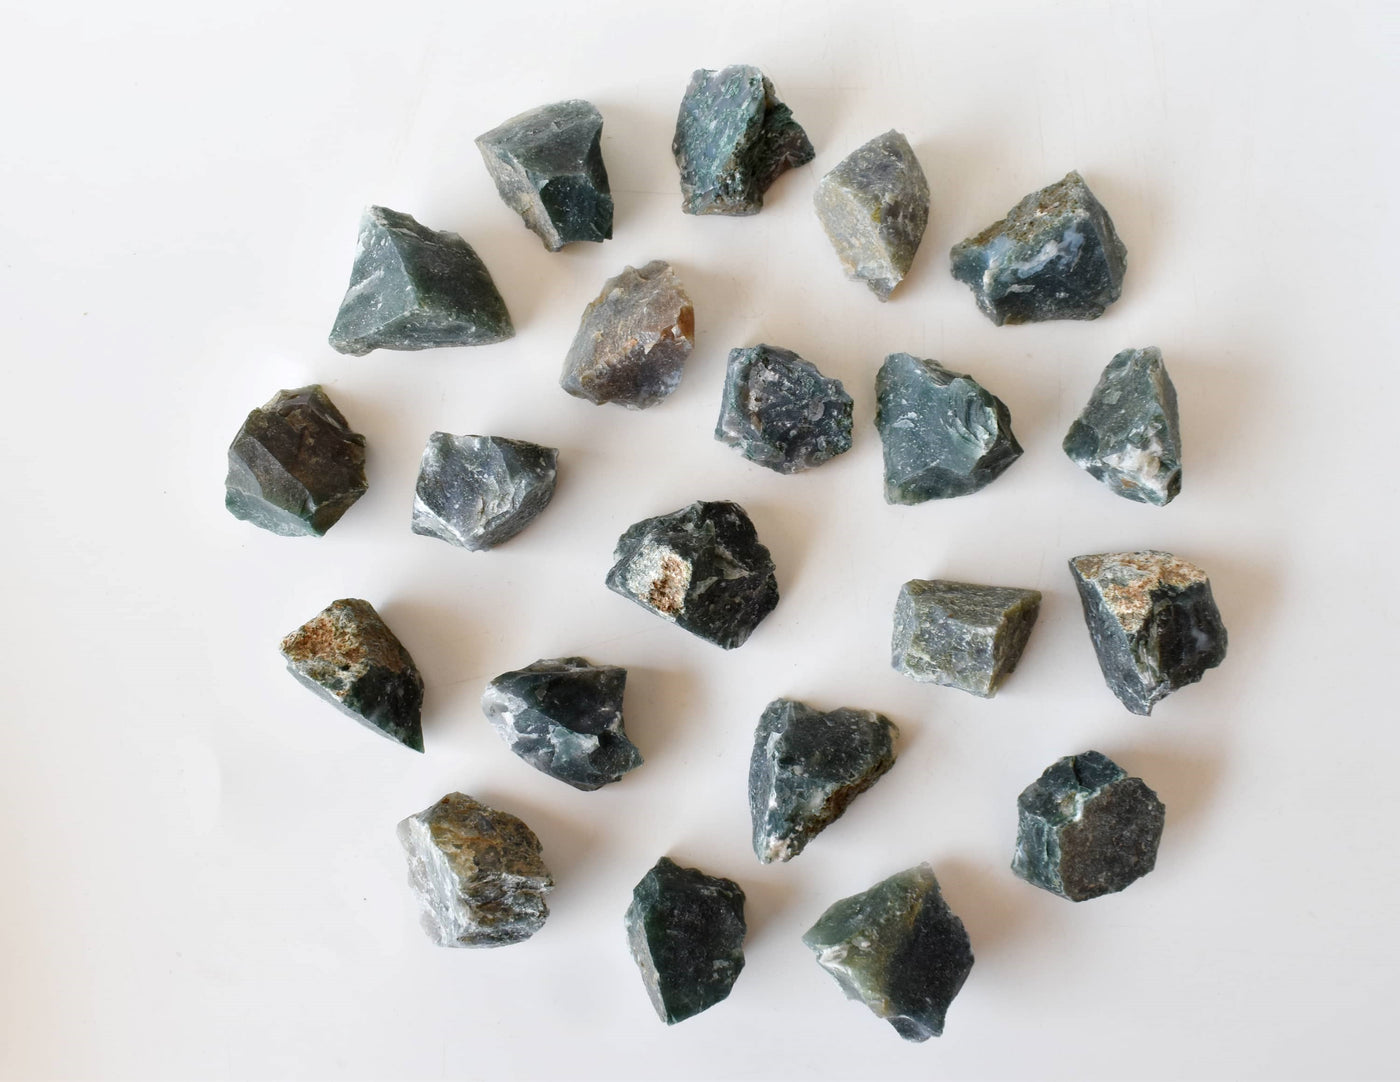 Moss Agate Rough Rocks(Encourage Tranquility and Emotional Balance)